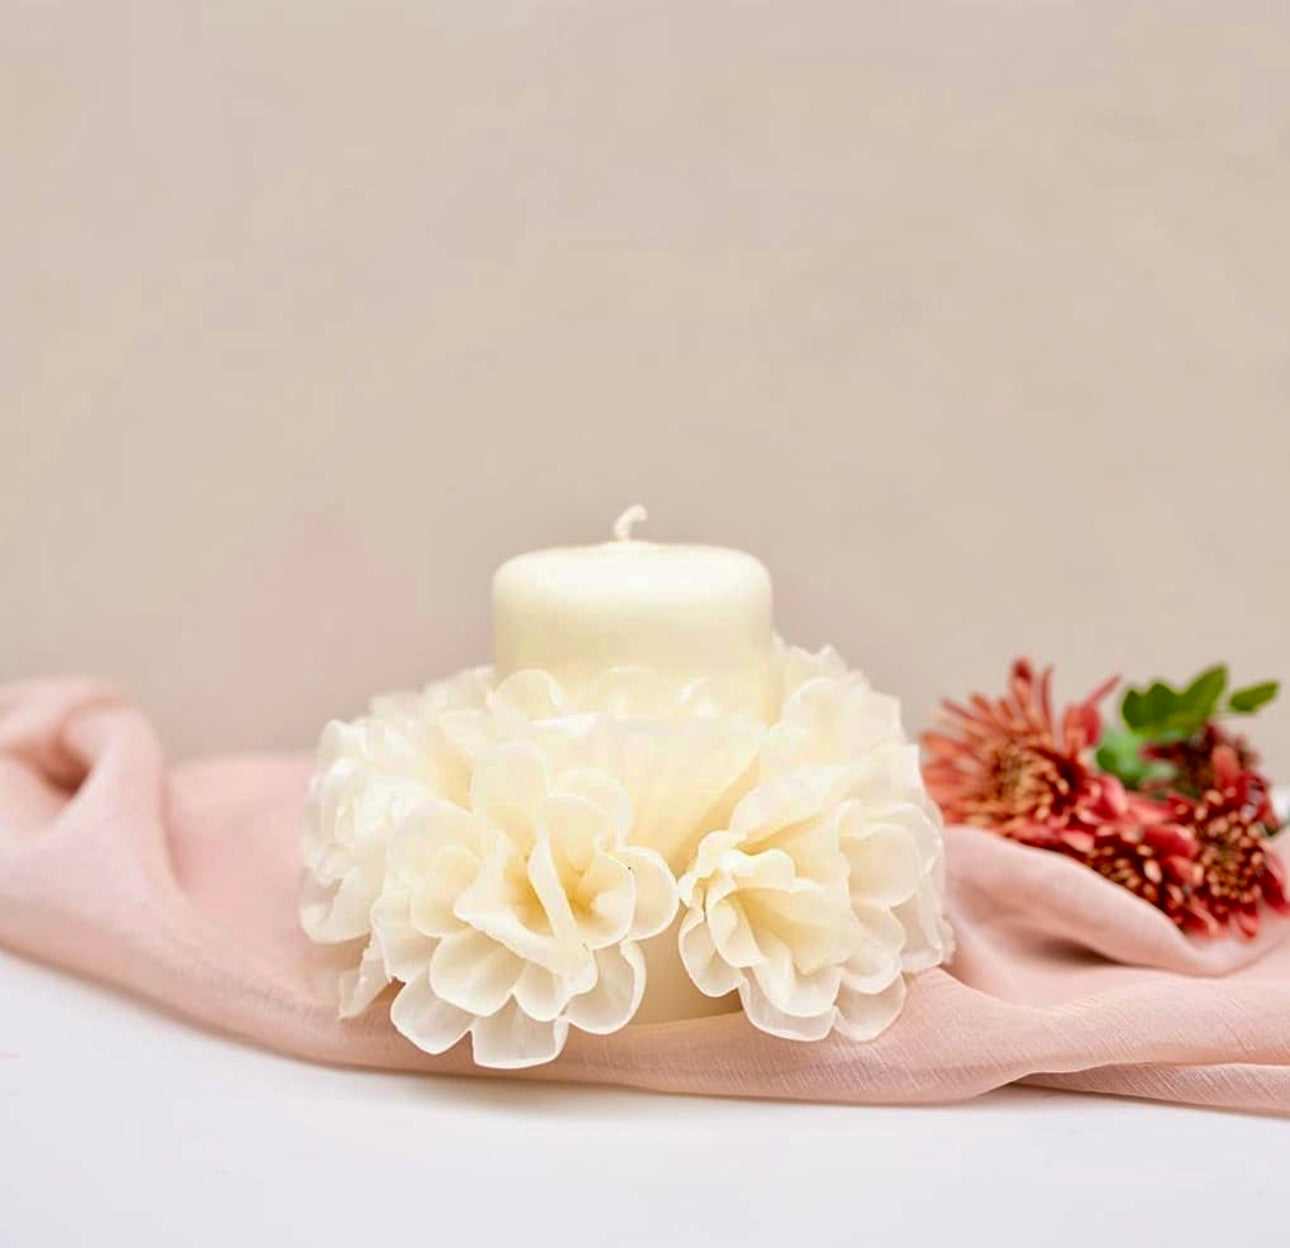 White Beeswax Pure Beeswax Yellow Beeswax Lace Candle Flower Paper Bow  Aromatherapy Mould Convenient and Durable Candle Making - AliExpress